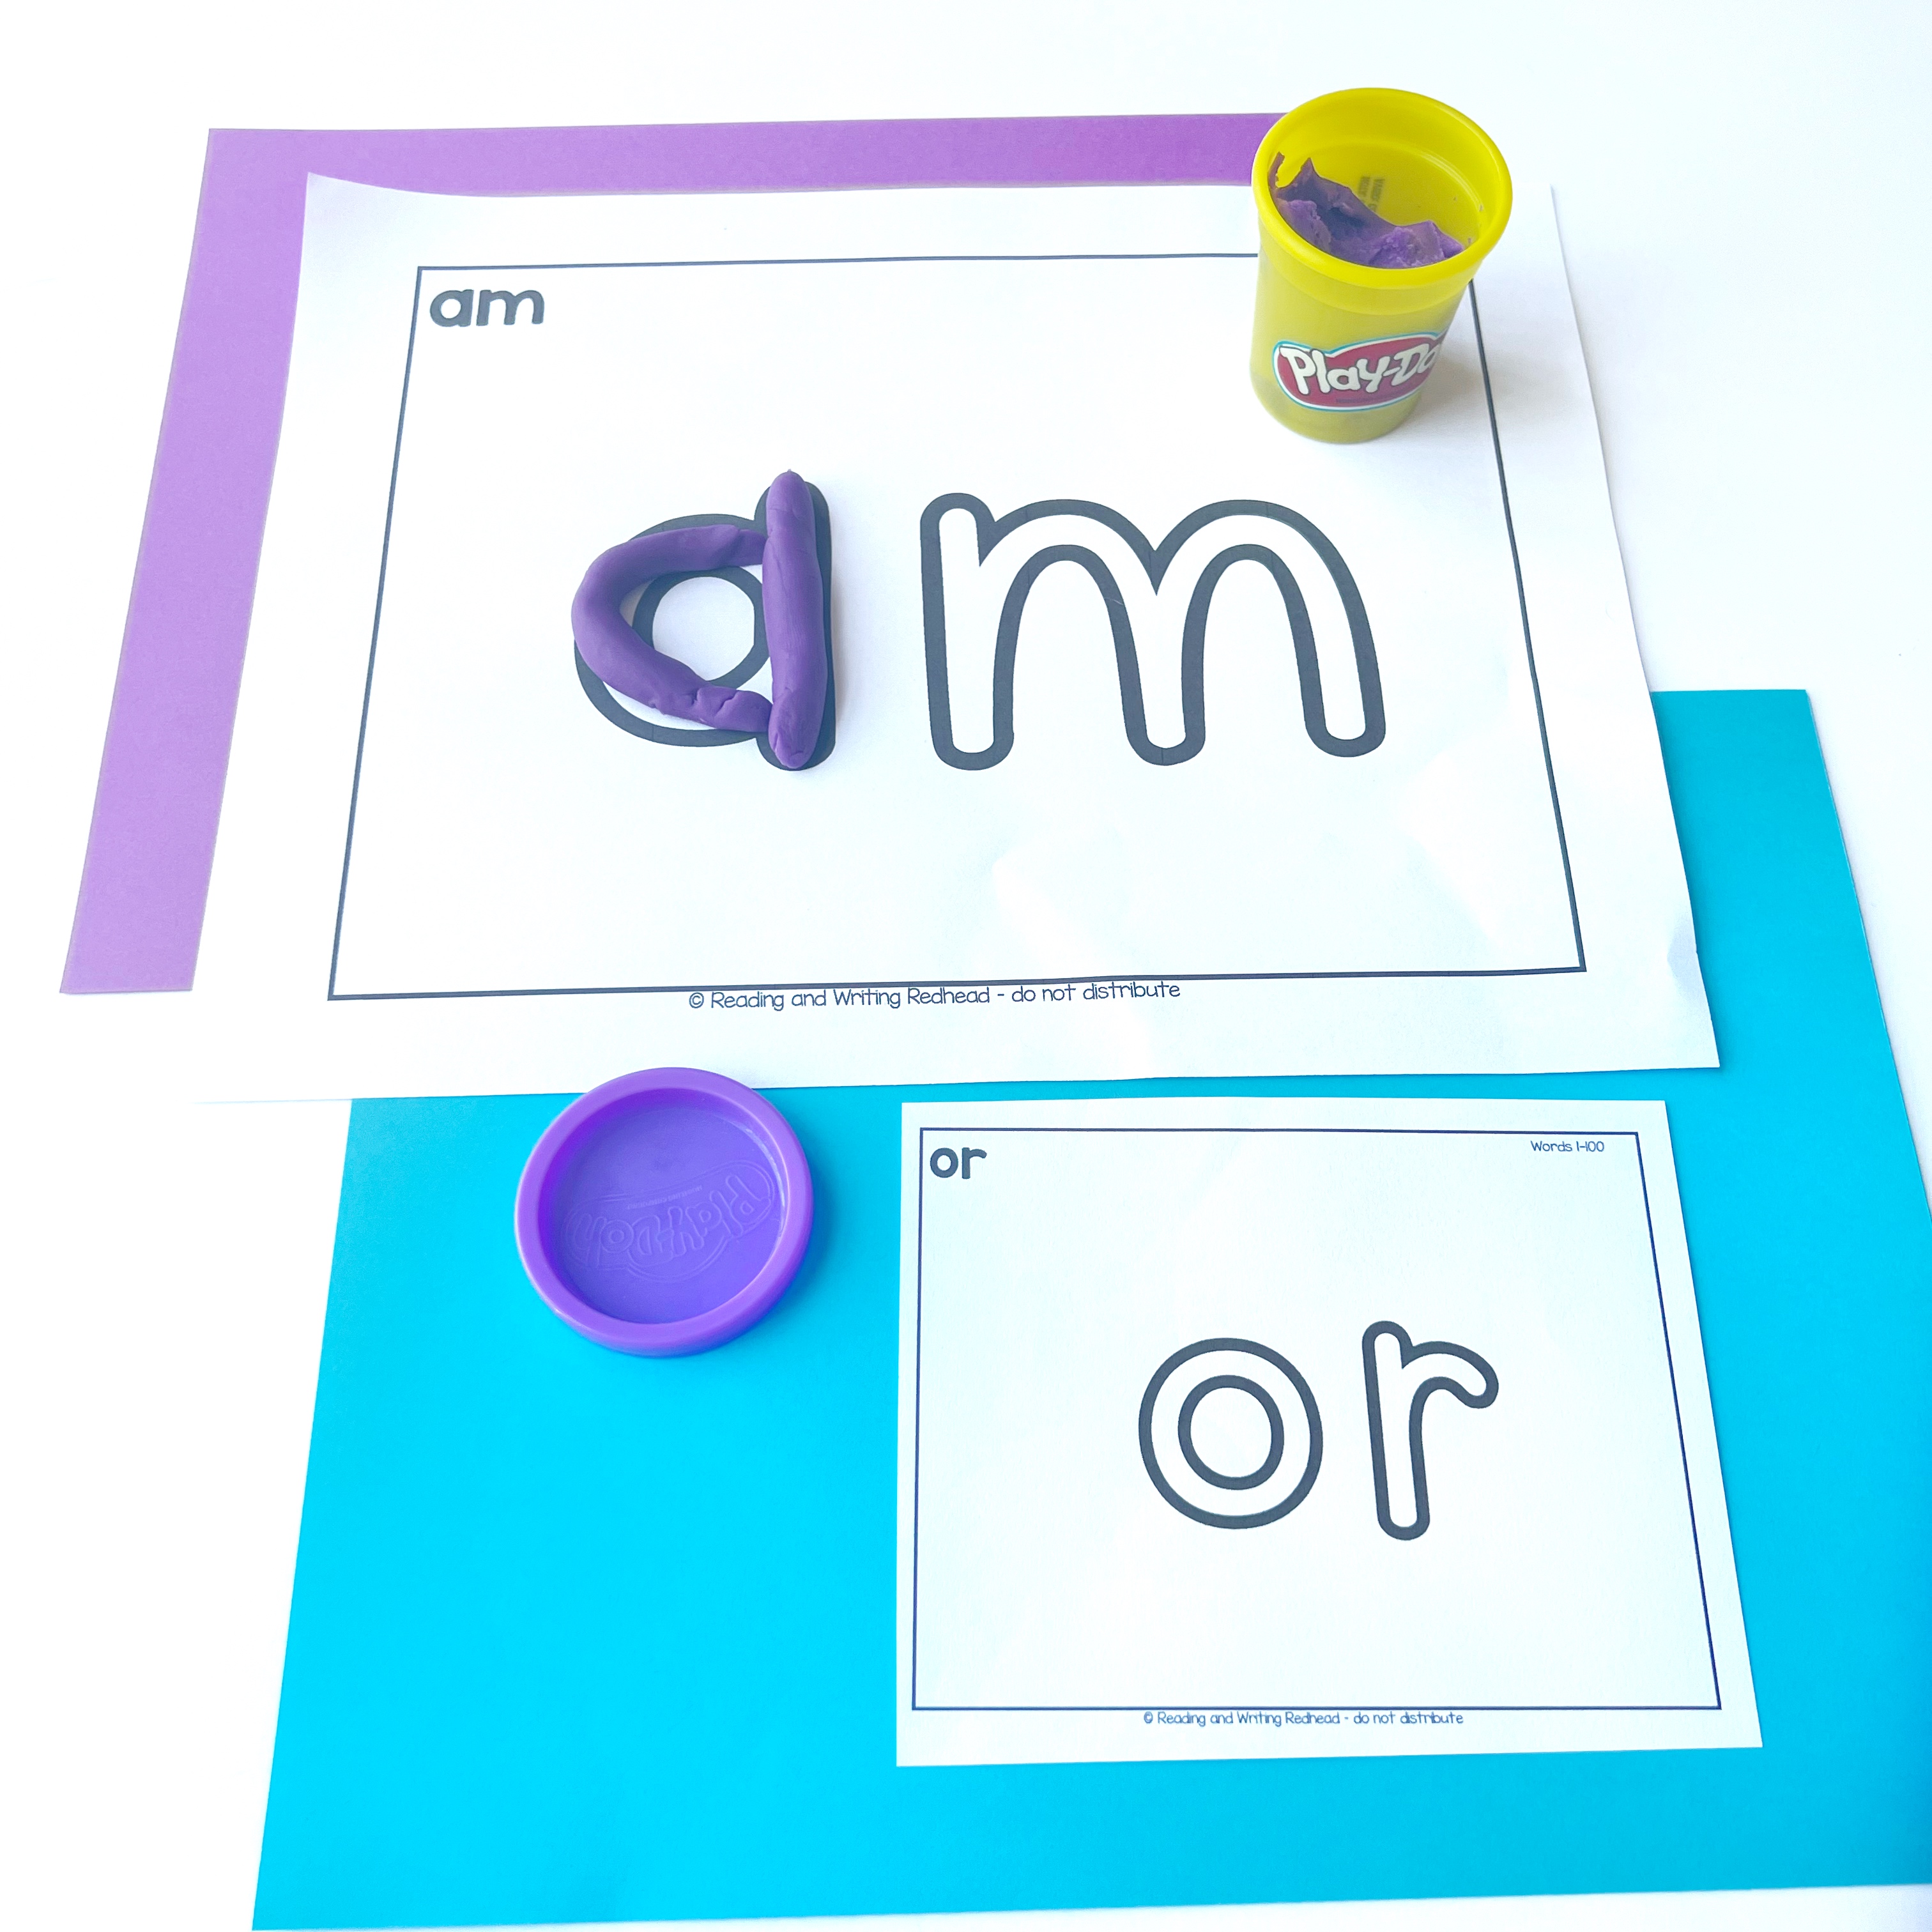 Playdoh mats in two sizes, with the words am and or on them.